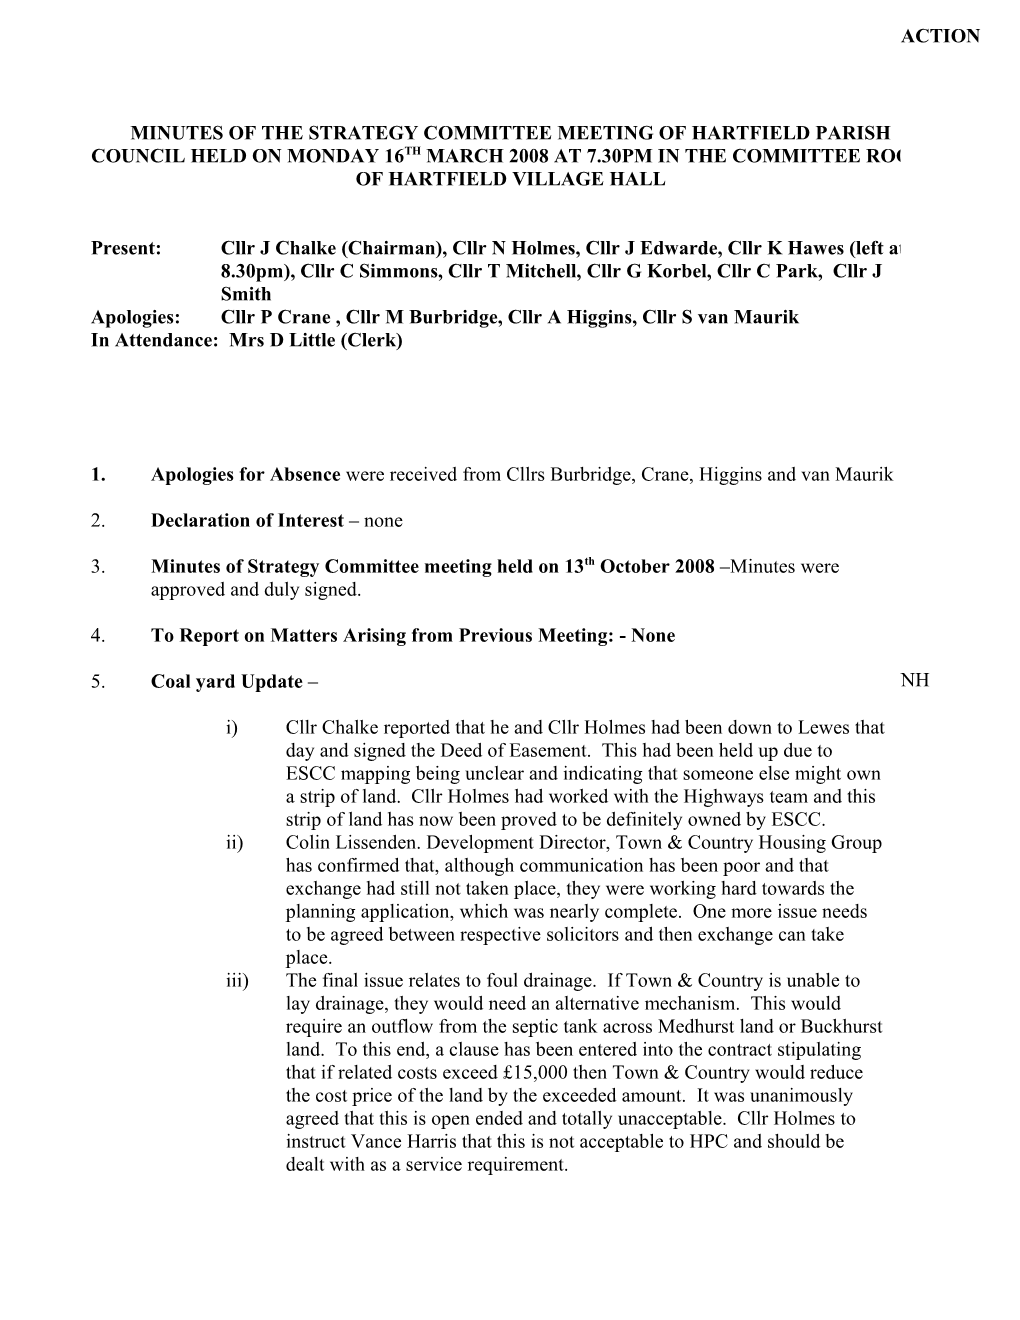 Minutes of the Strategy Committee Meeting of Hartfield Parish Council Held on Monday 9